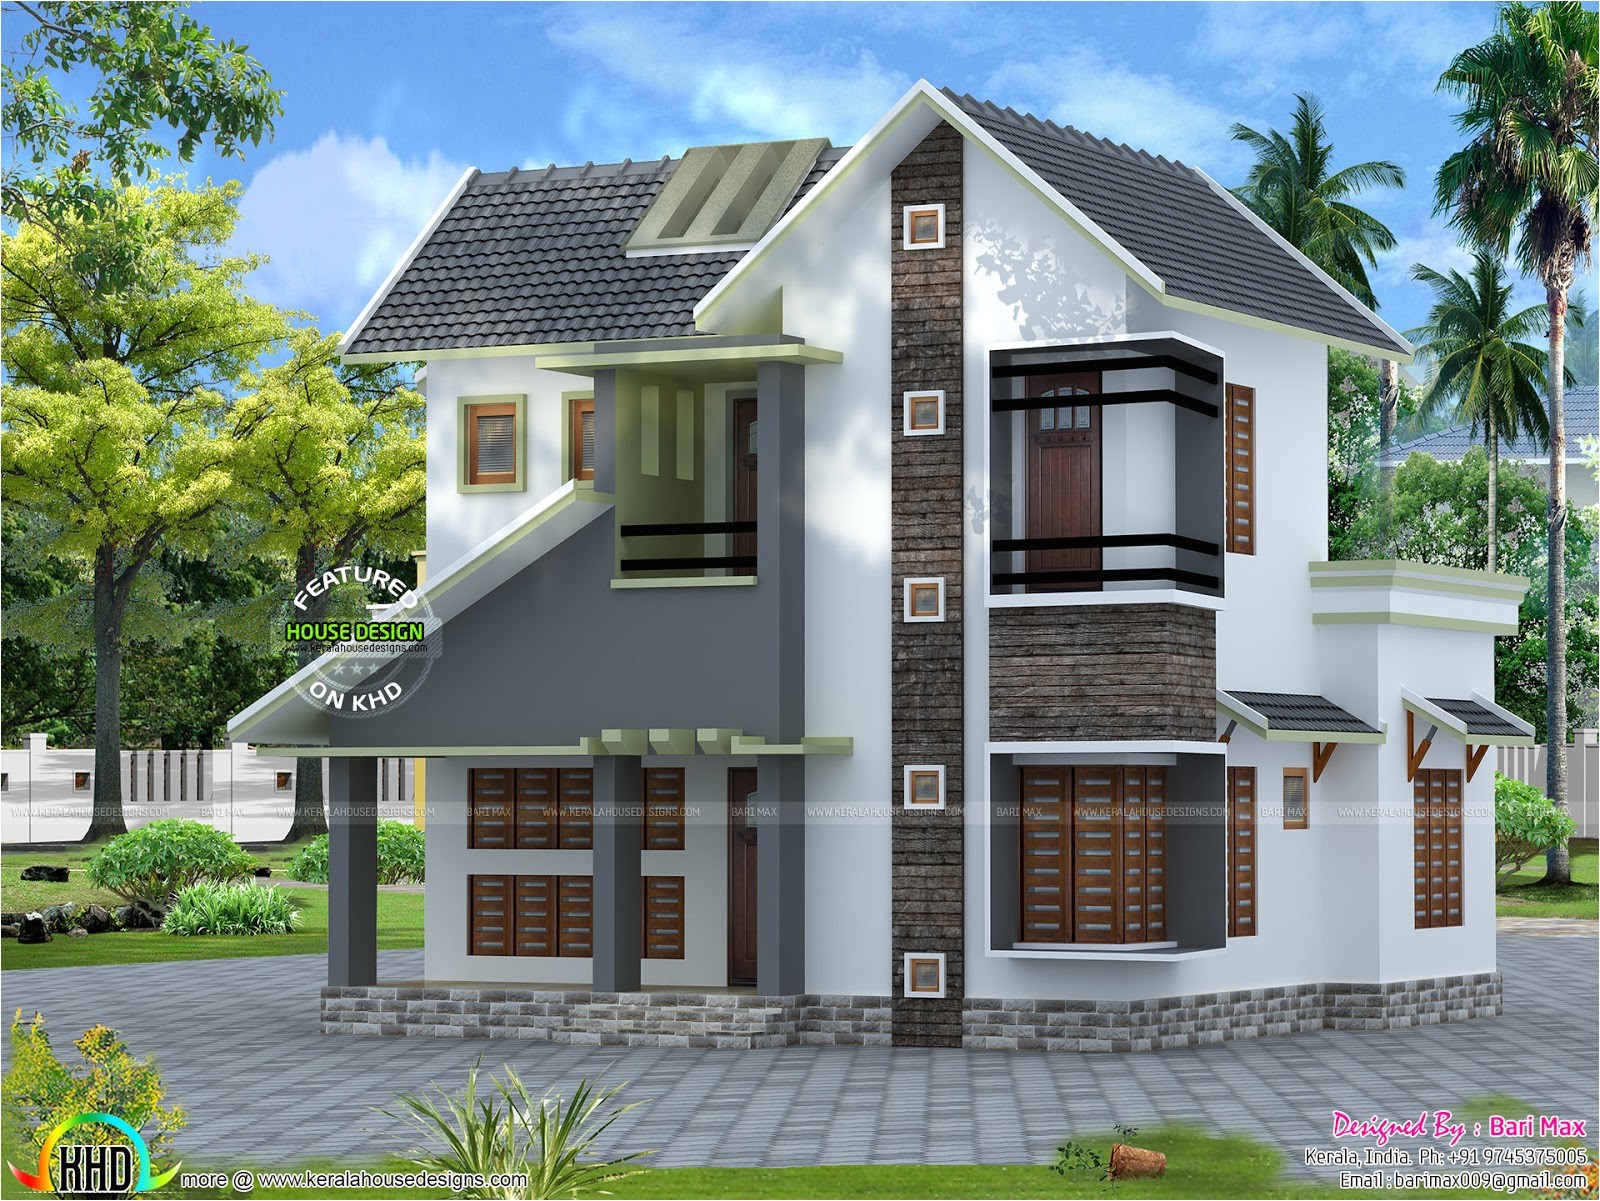 slope roof low cost home design kerala and floor plans budget plan low budget house plans in india low budget house plans in sri lanka